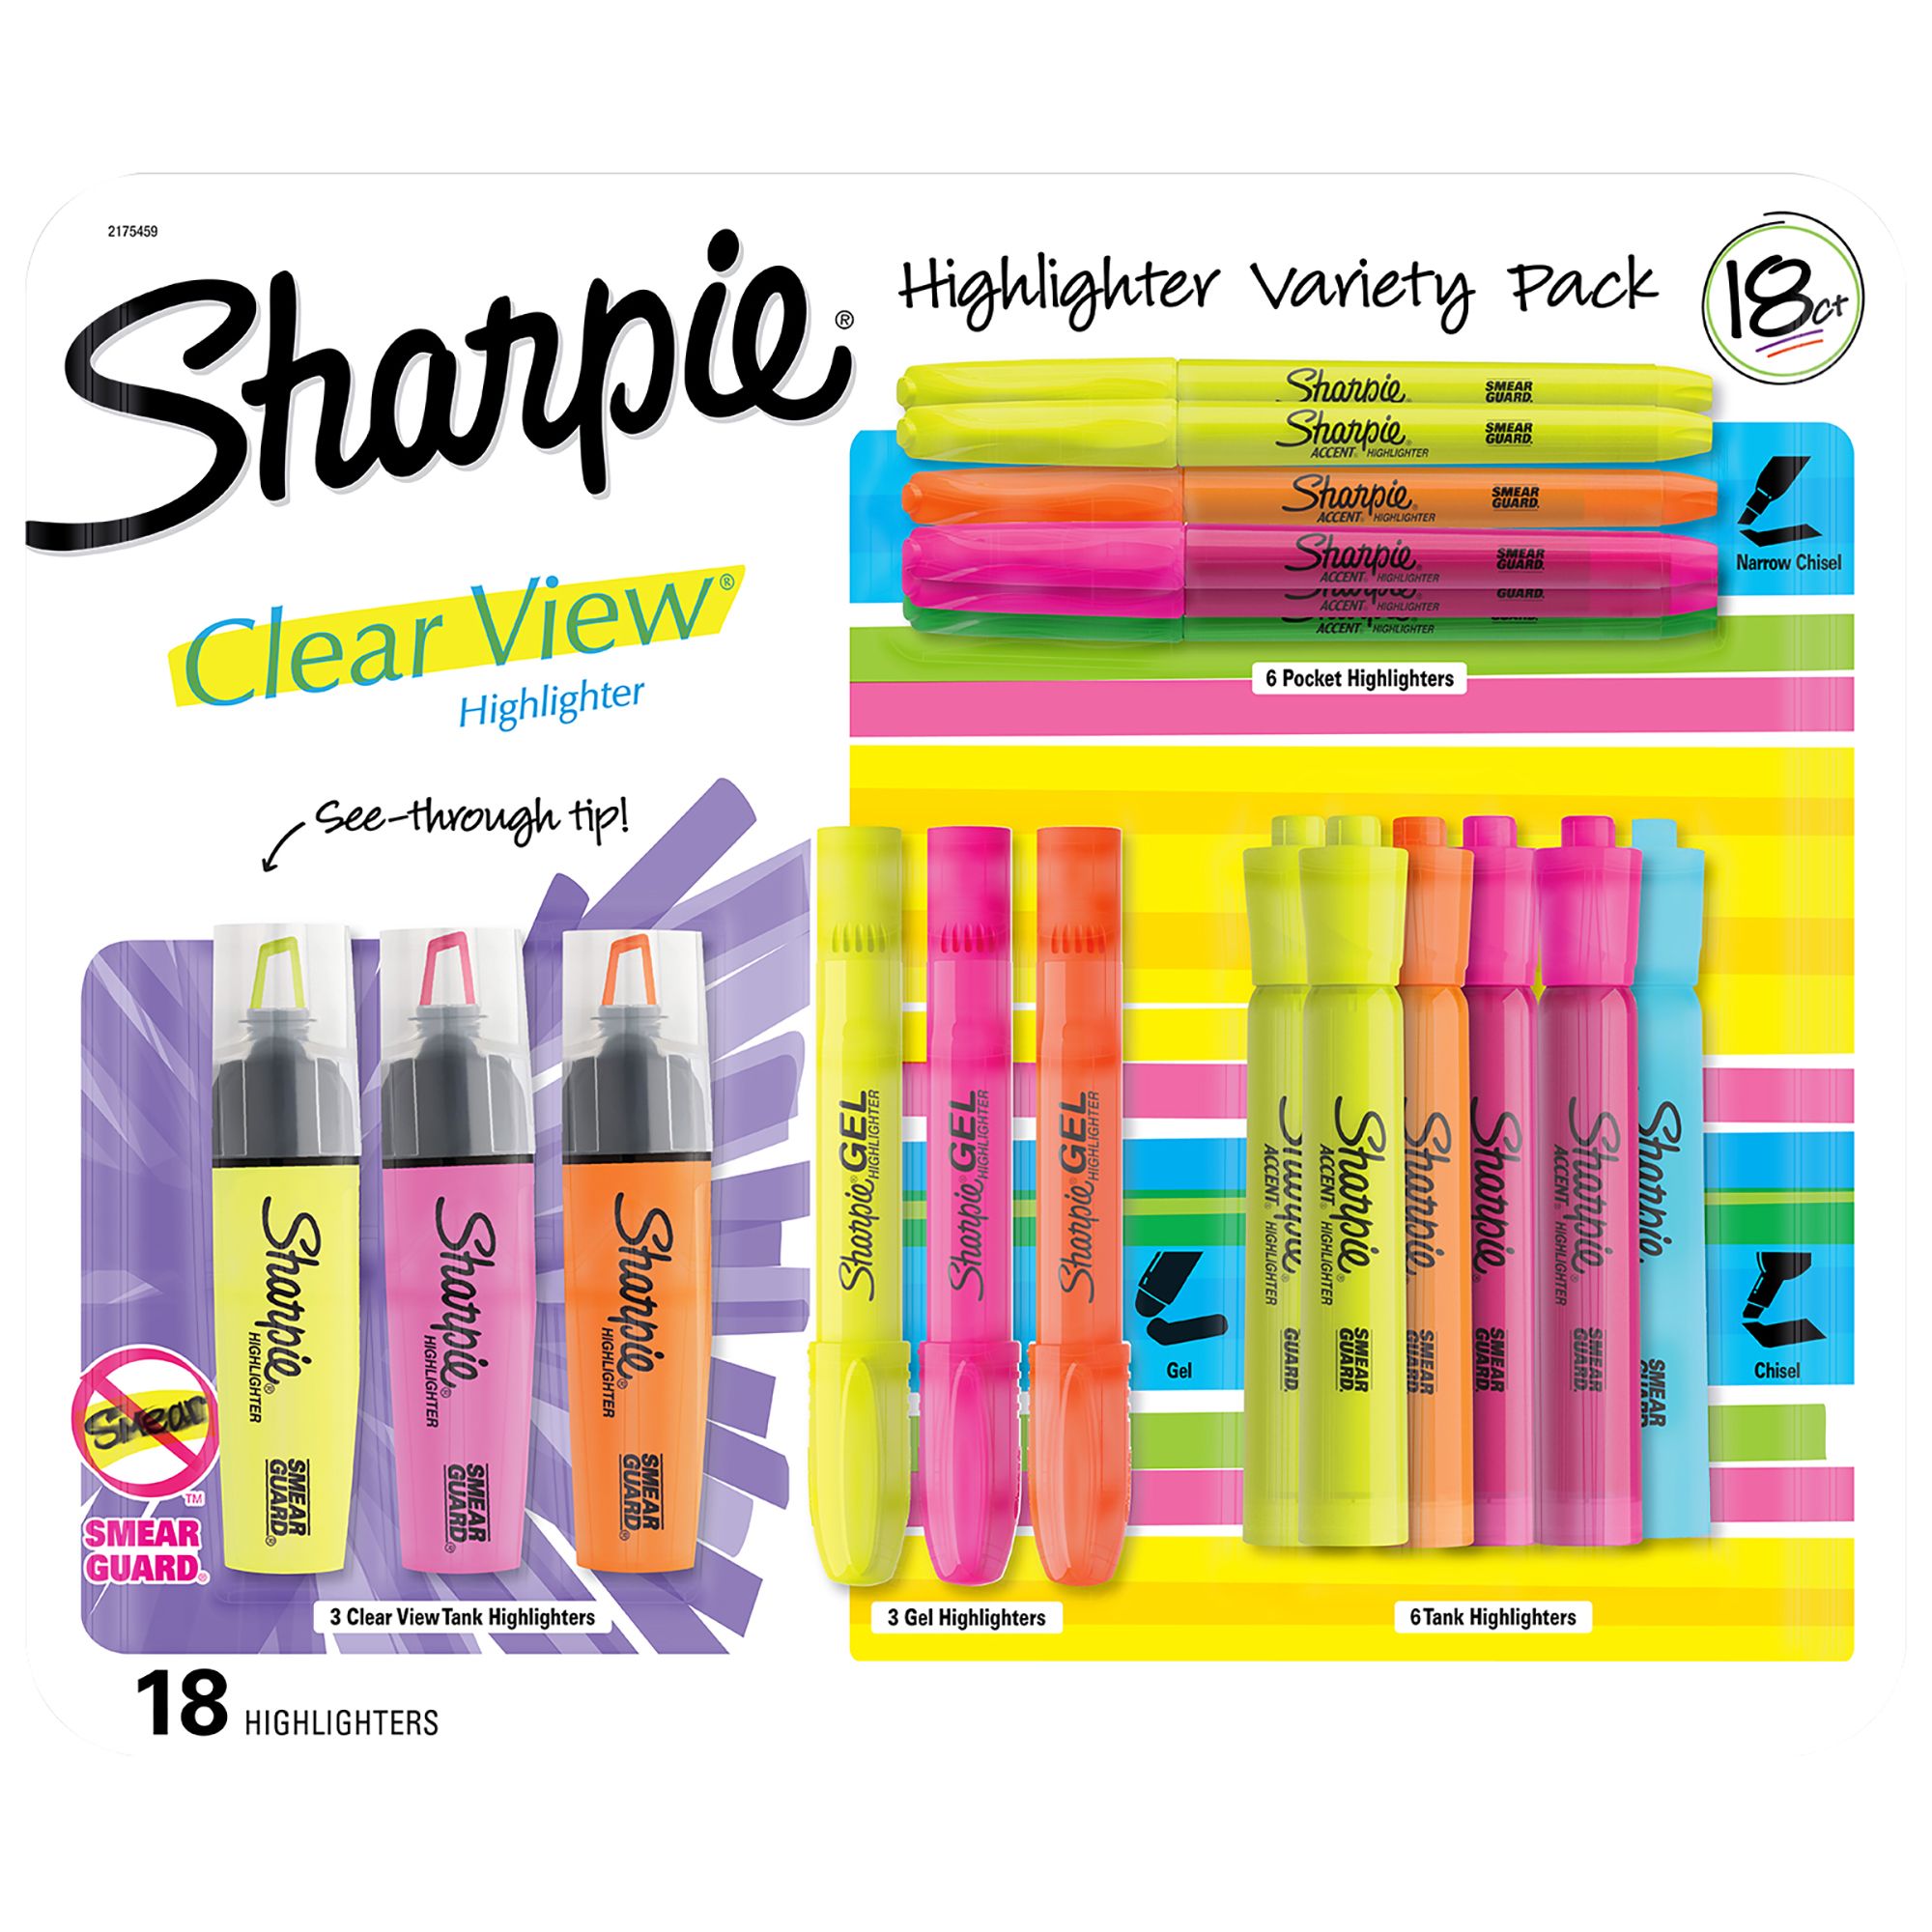 Paper Mate Flair Pen, 18 ct. - Assorted Colors